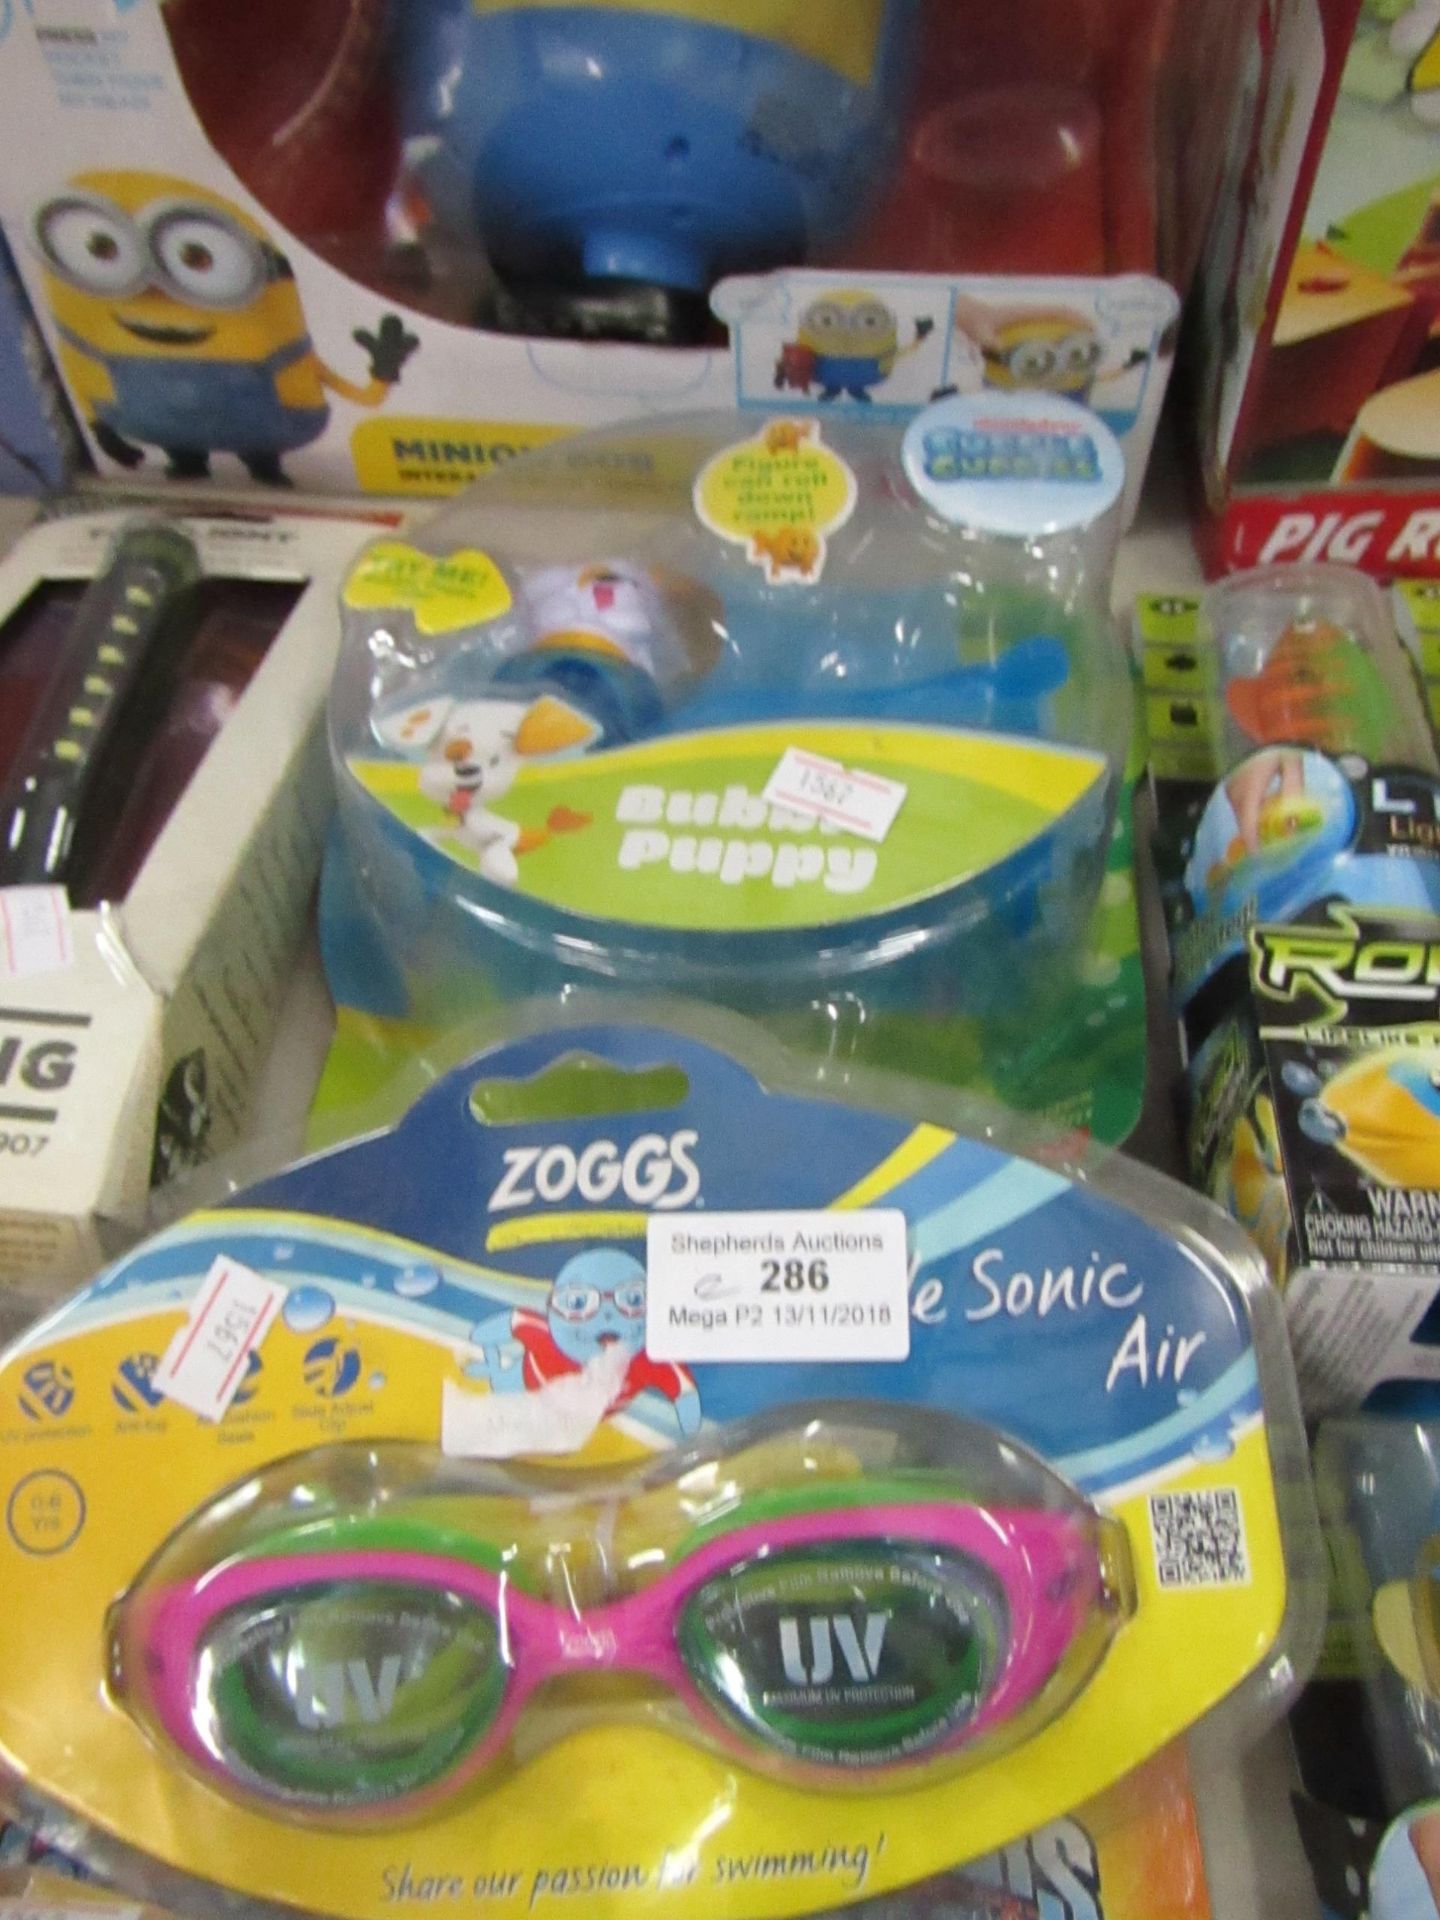 2x Items being; Bubble puppy toy and Zoggs sonic air goggle (0-6yrs). Both new in packaging.